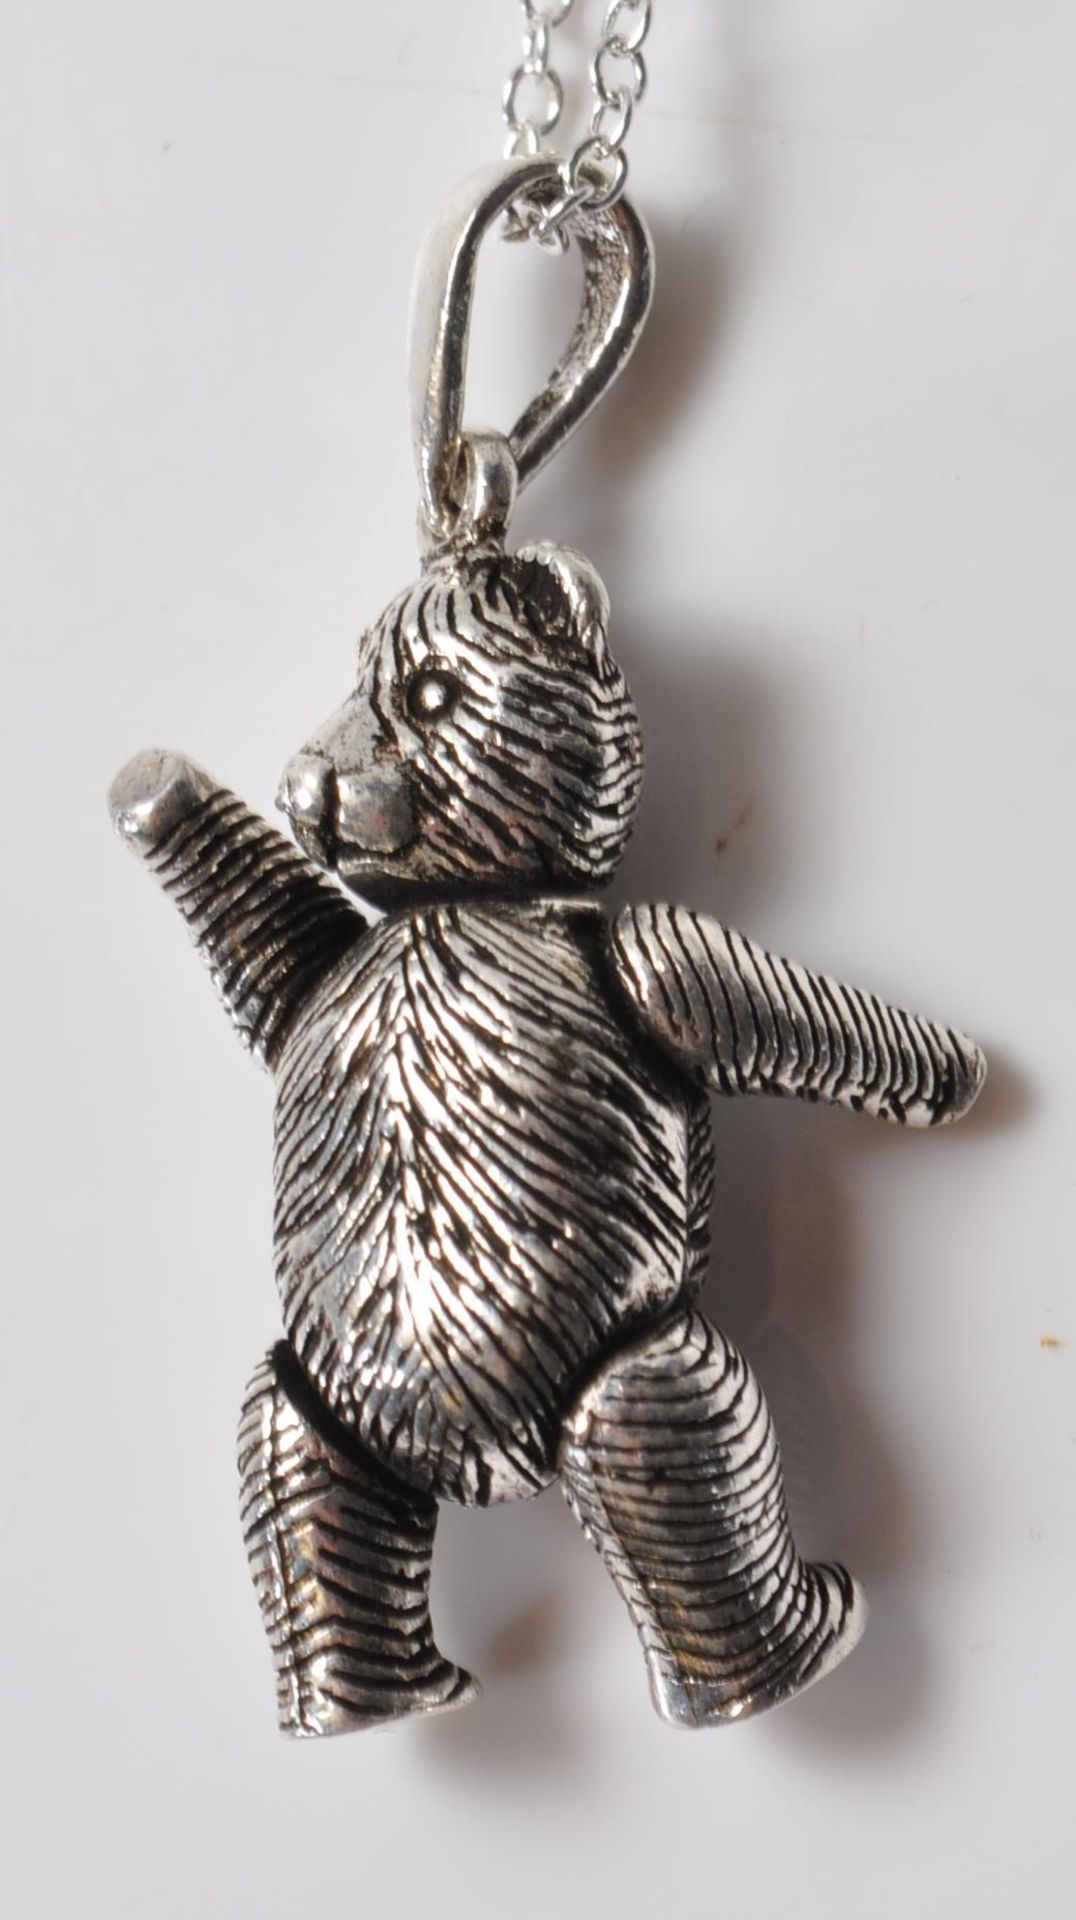 STAMPED 925 SILVER TEDDYBEAR PENDANT NECKLACE. - Image 3 of 8